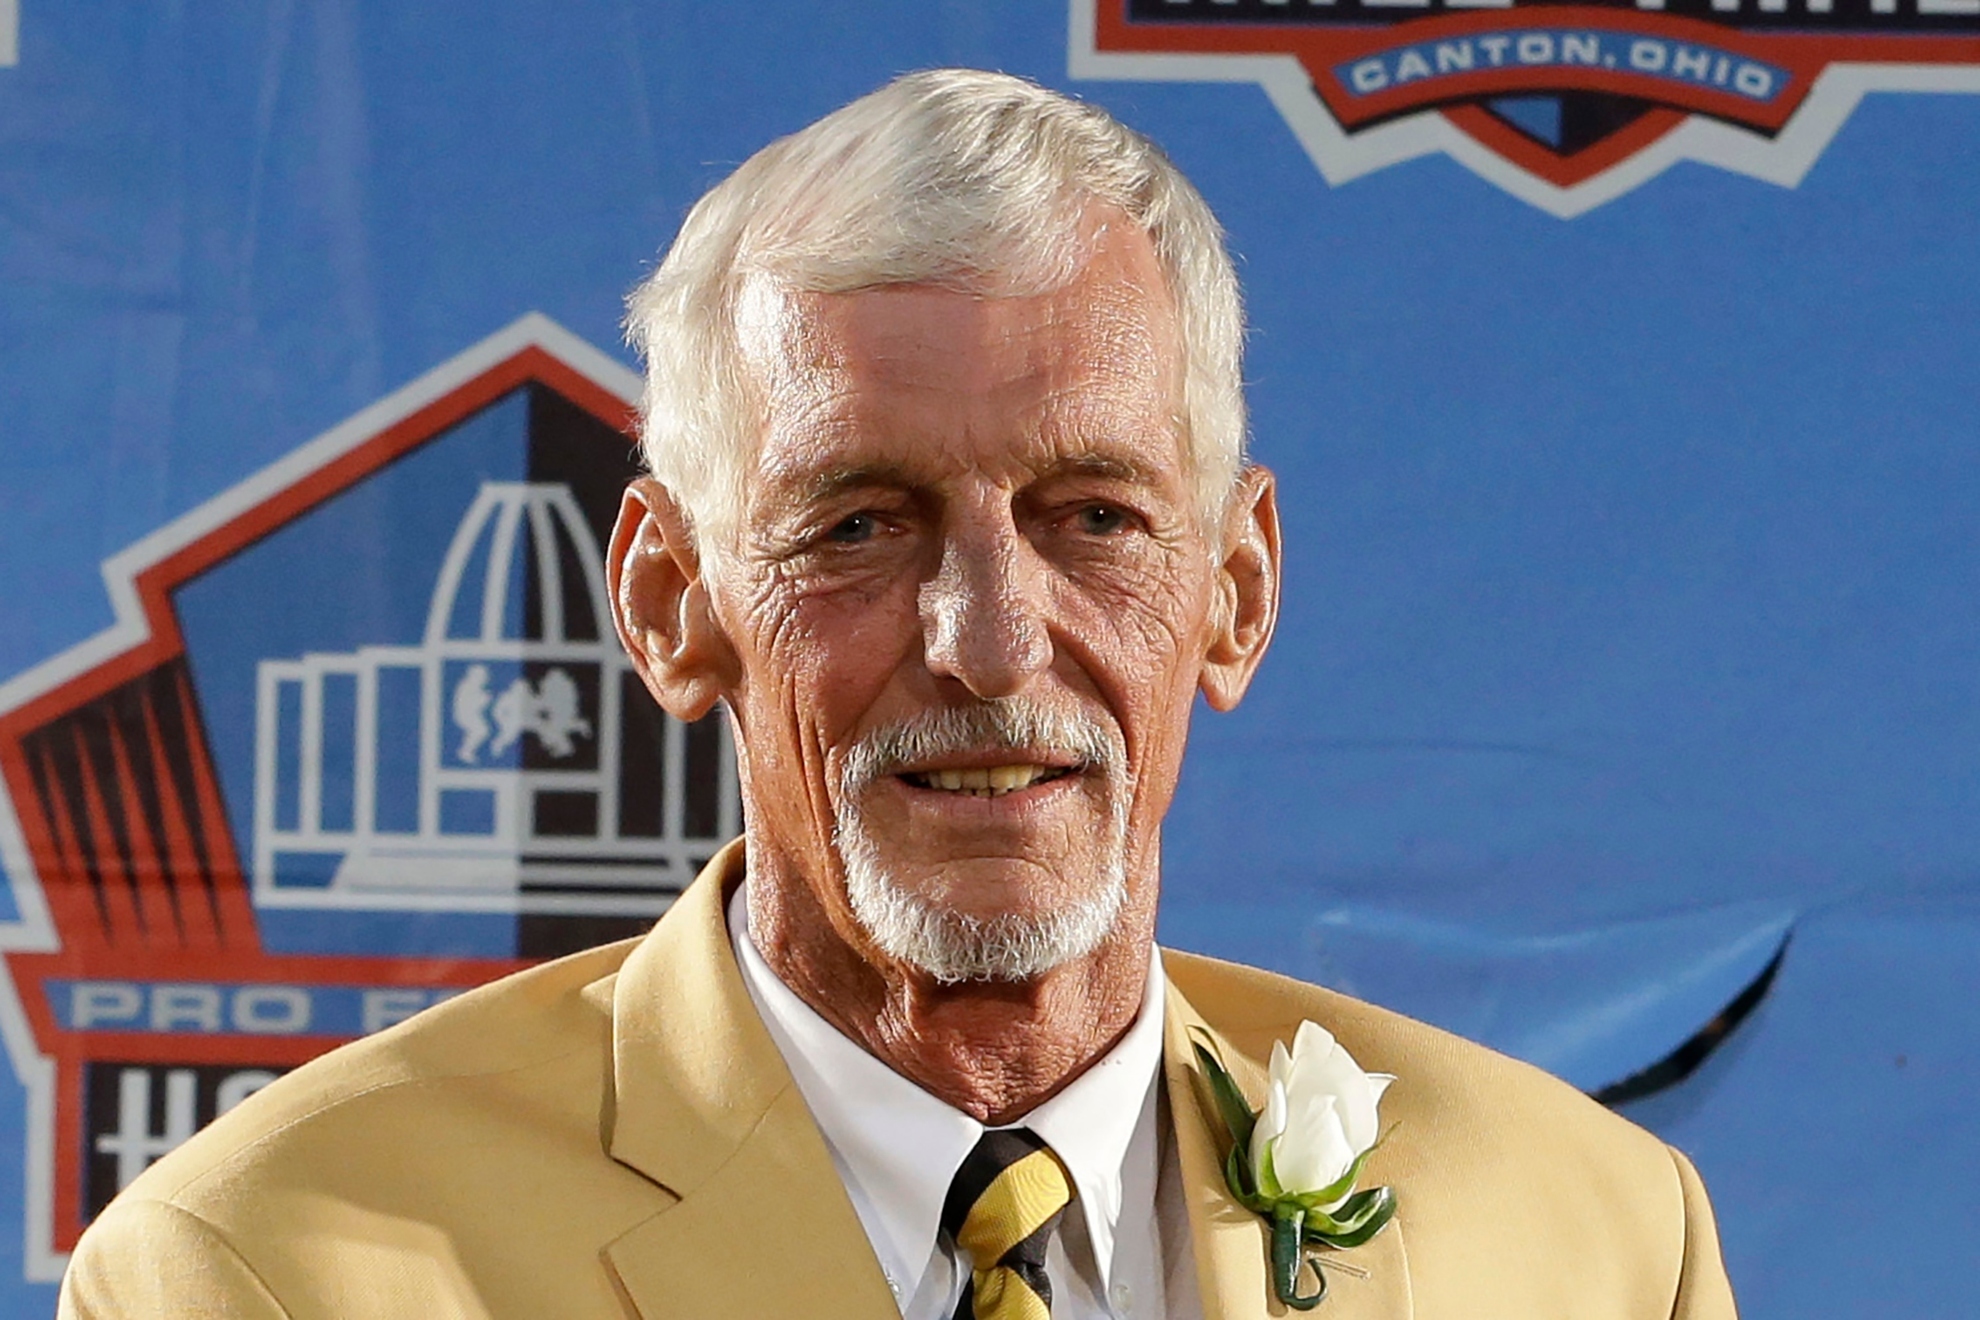 Hall of Fame inductee Ray Guy